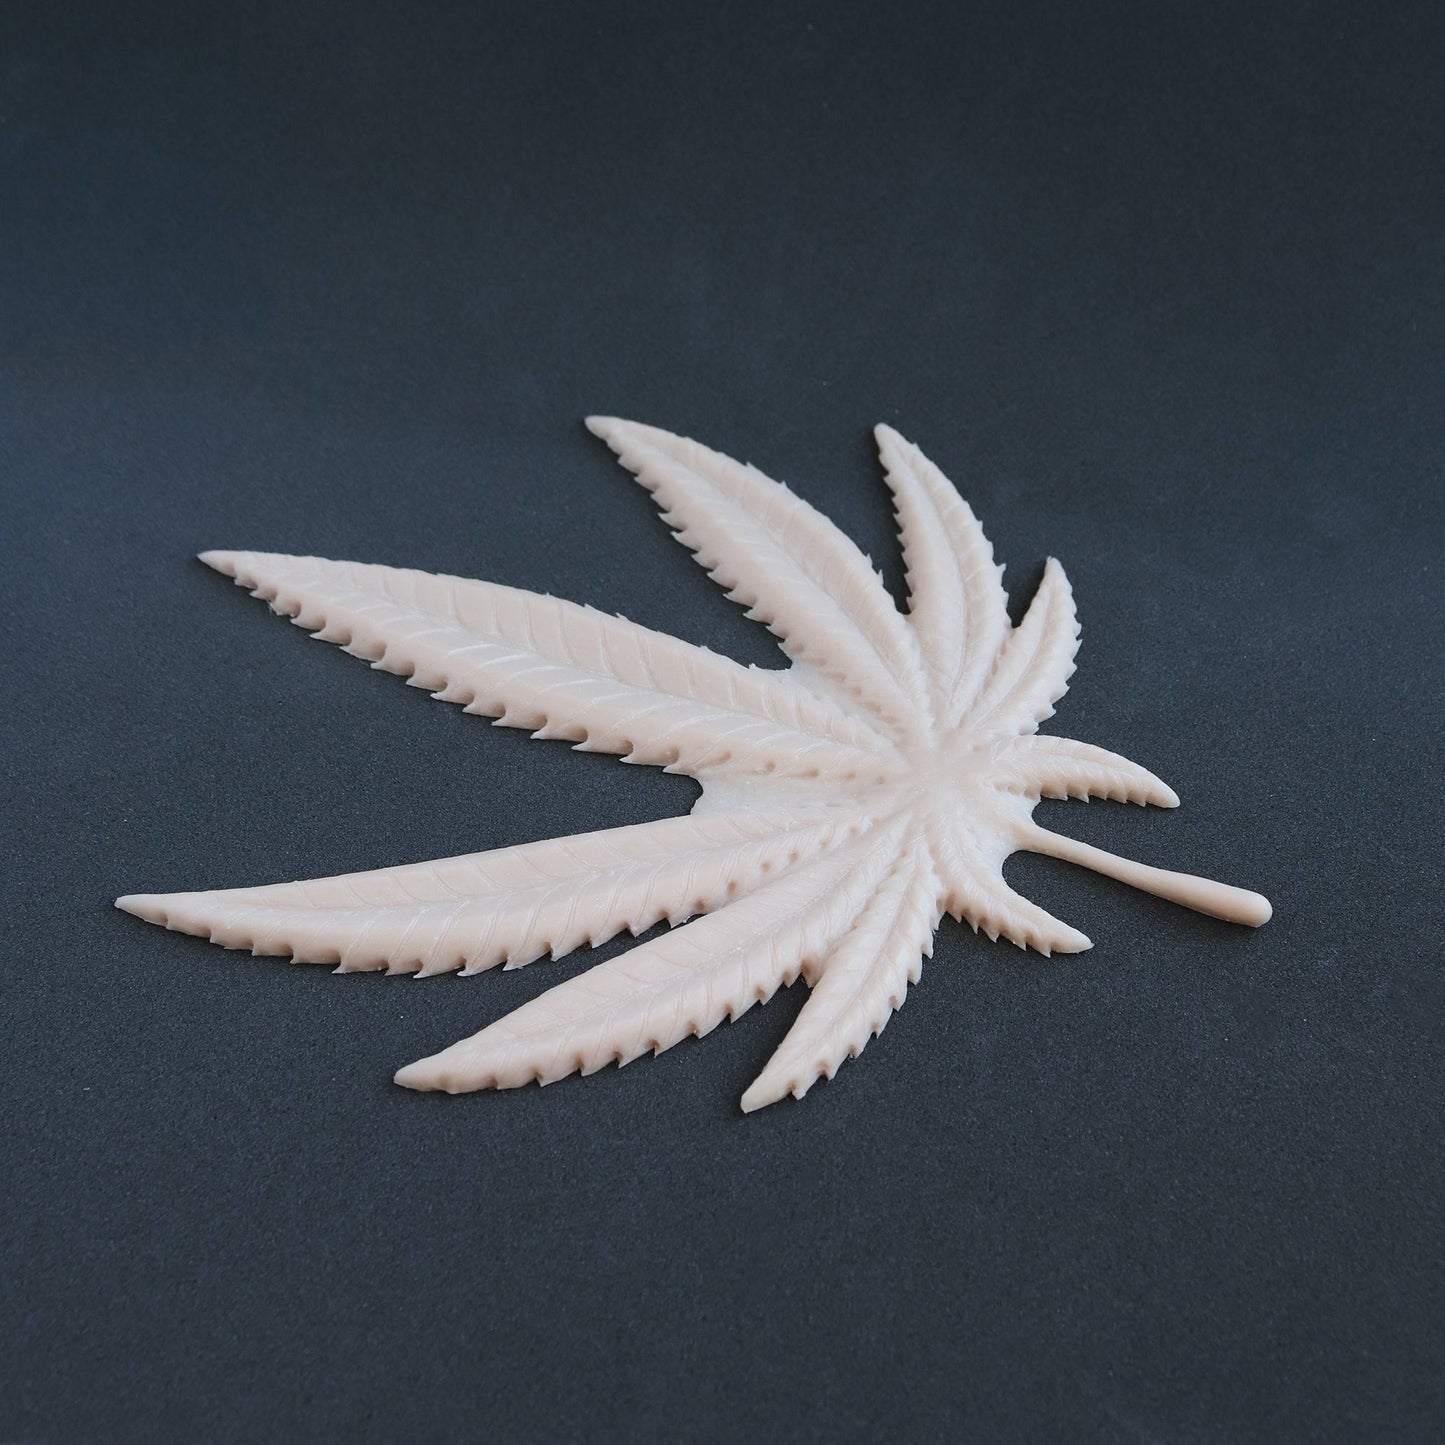 Cannabis Pasties / Nipple Patches (Pair) - Silicone makeup prosthetic in vanilla shade on a black surface at an angle